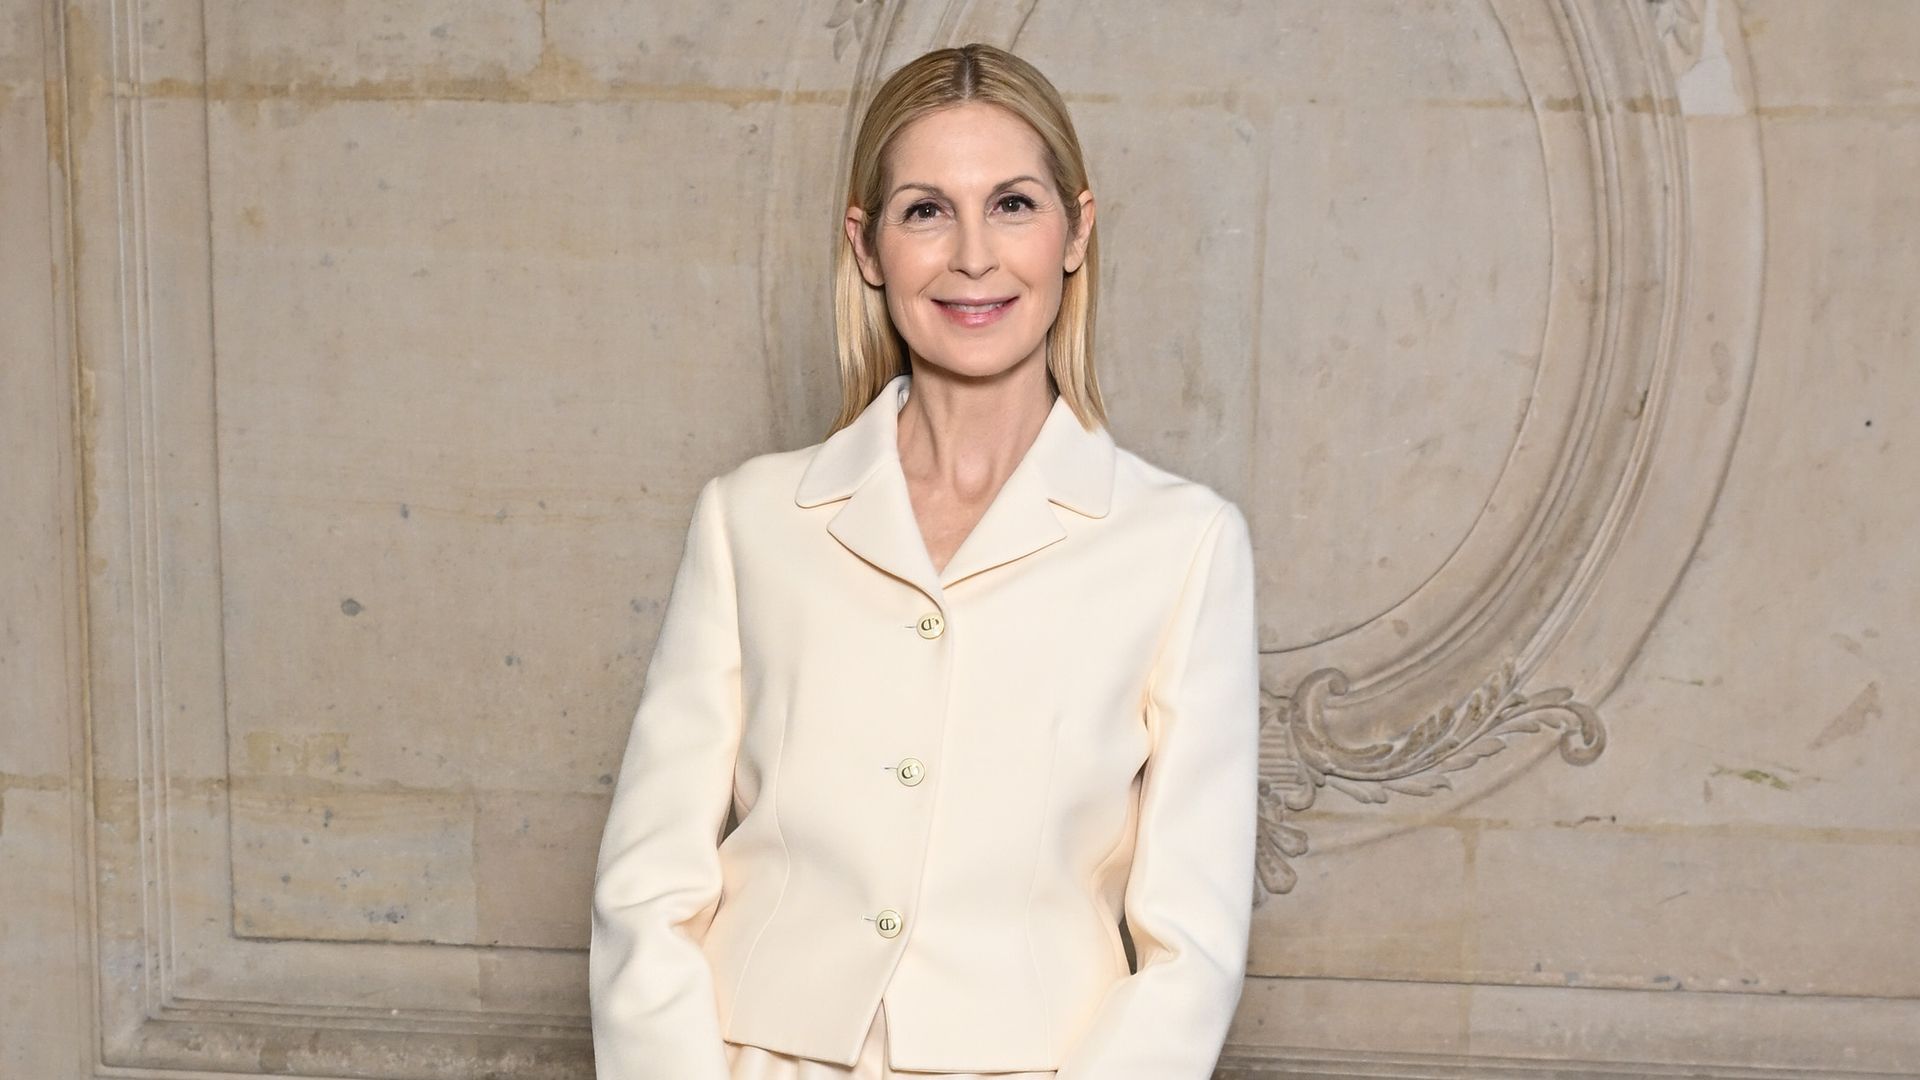 PARIS, FRANCE - JANUARY 22: (EDITORIAL USE ONLY - For Non-Editorial use please seek approval from Fashion House) Kelly Rutherford attends the Christian Dior Haute Couture Spring/Summer 2024 show as part of Paris Fashion Week  on January 22, 2024 in Paris, France. (Photo by Stephane Cardinale - Corbis/Corbis via Getty Images)